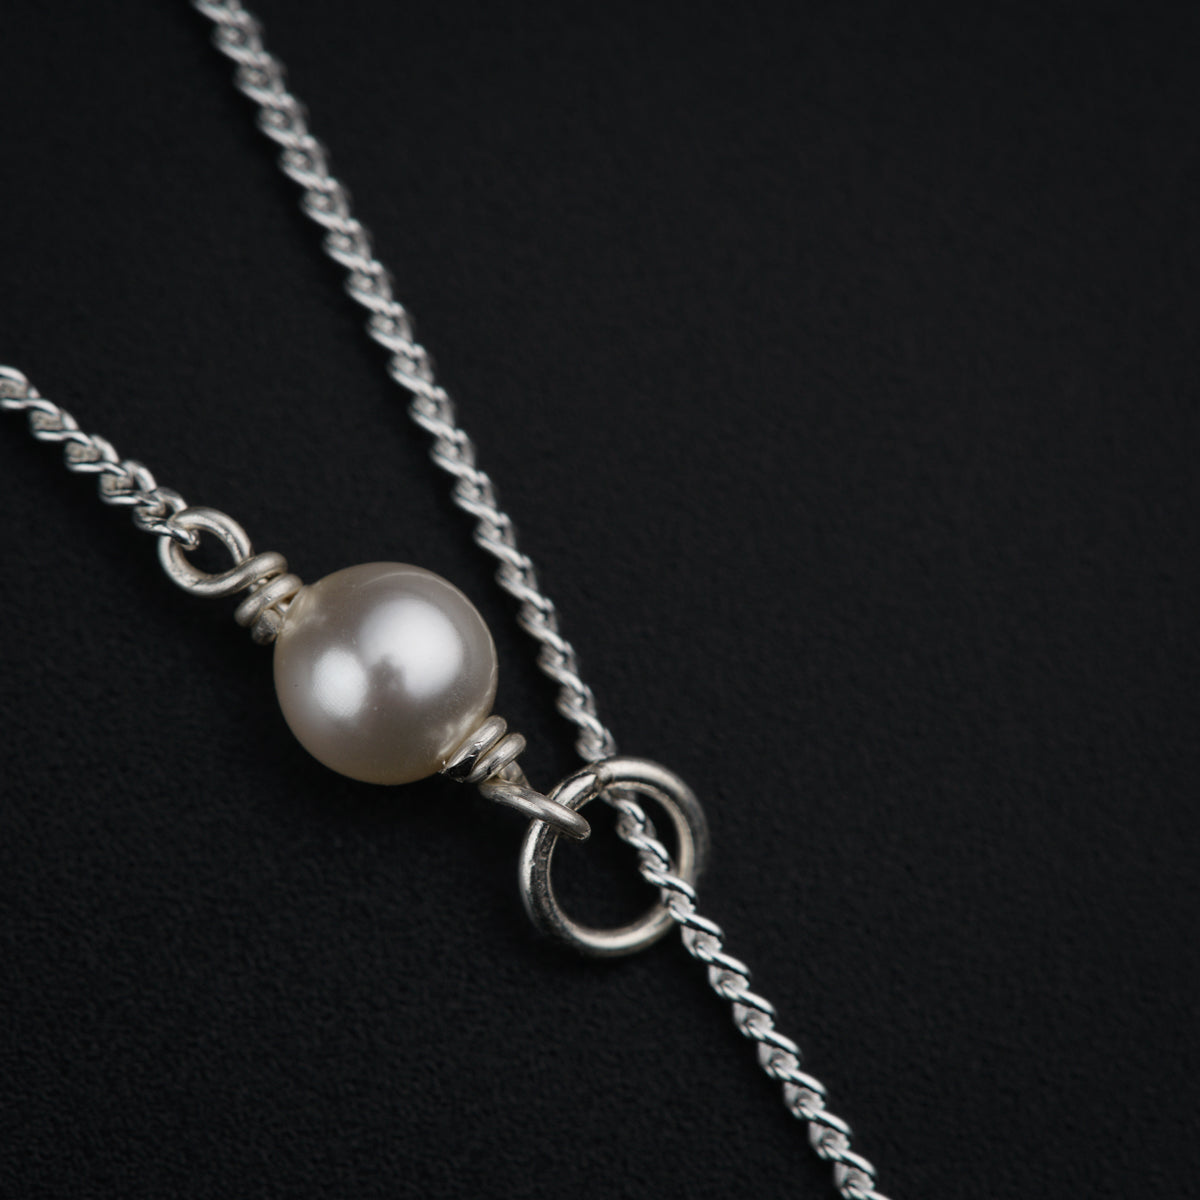 a necklace with a pearl on a chain